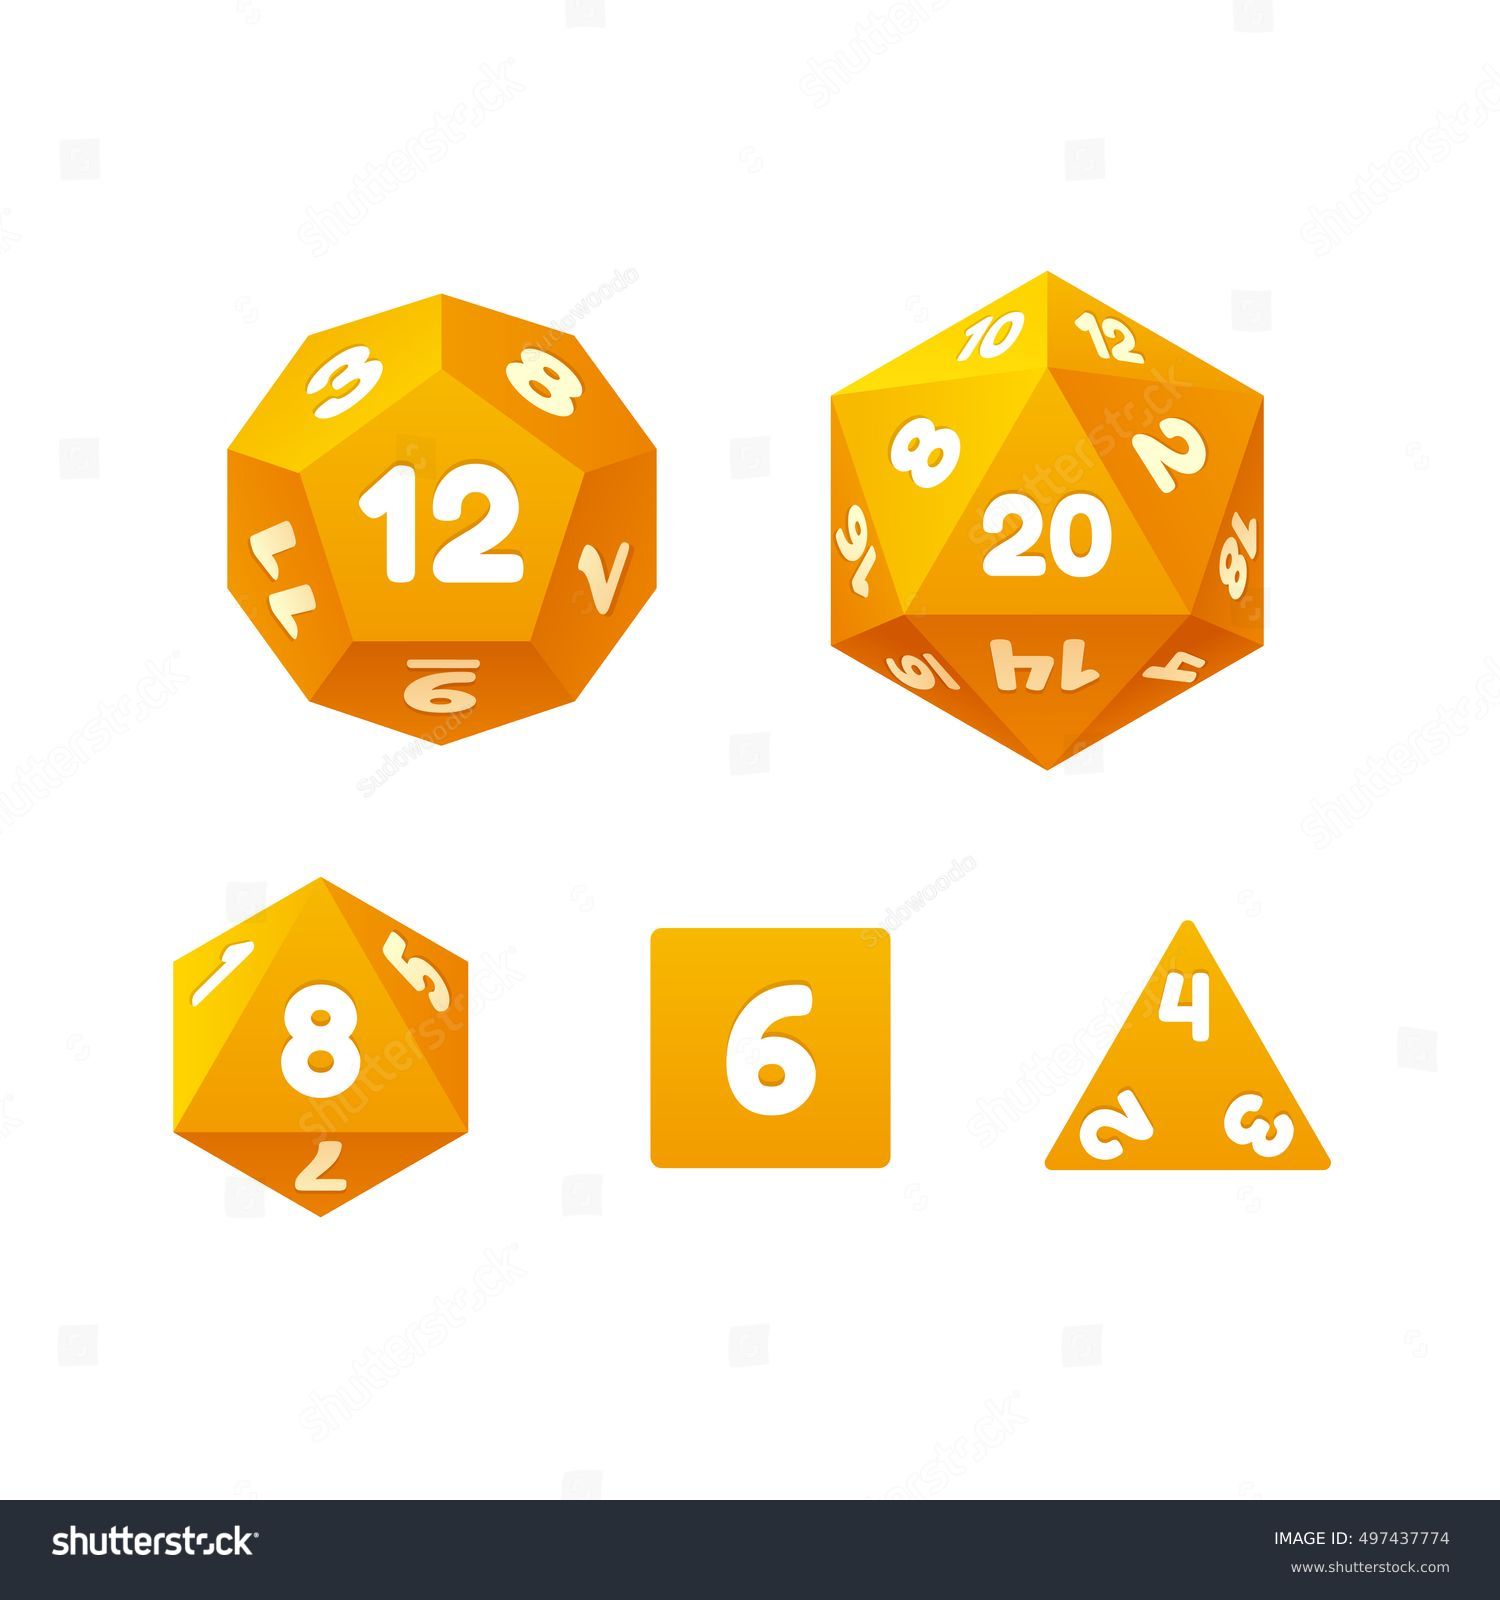 SVG of Vector icon set of dice for fantasy RPG tabletop games. Standard board game polyhedral dice with different number of sides. svg